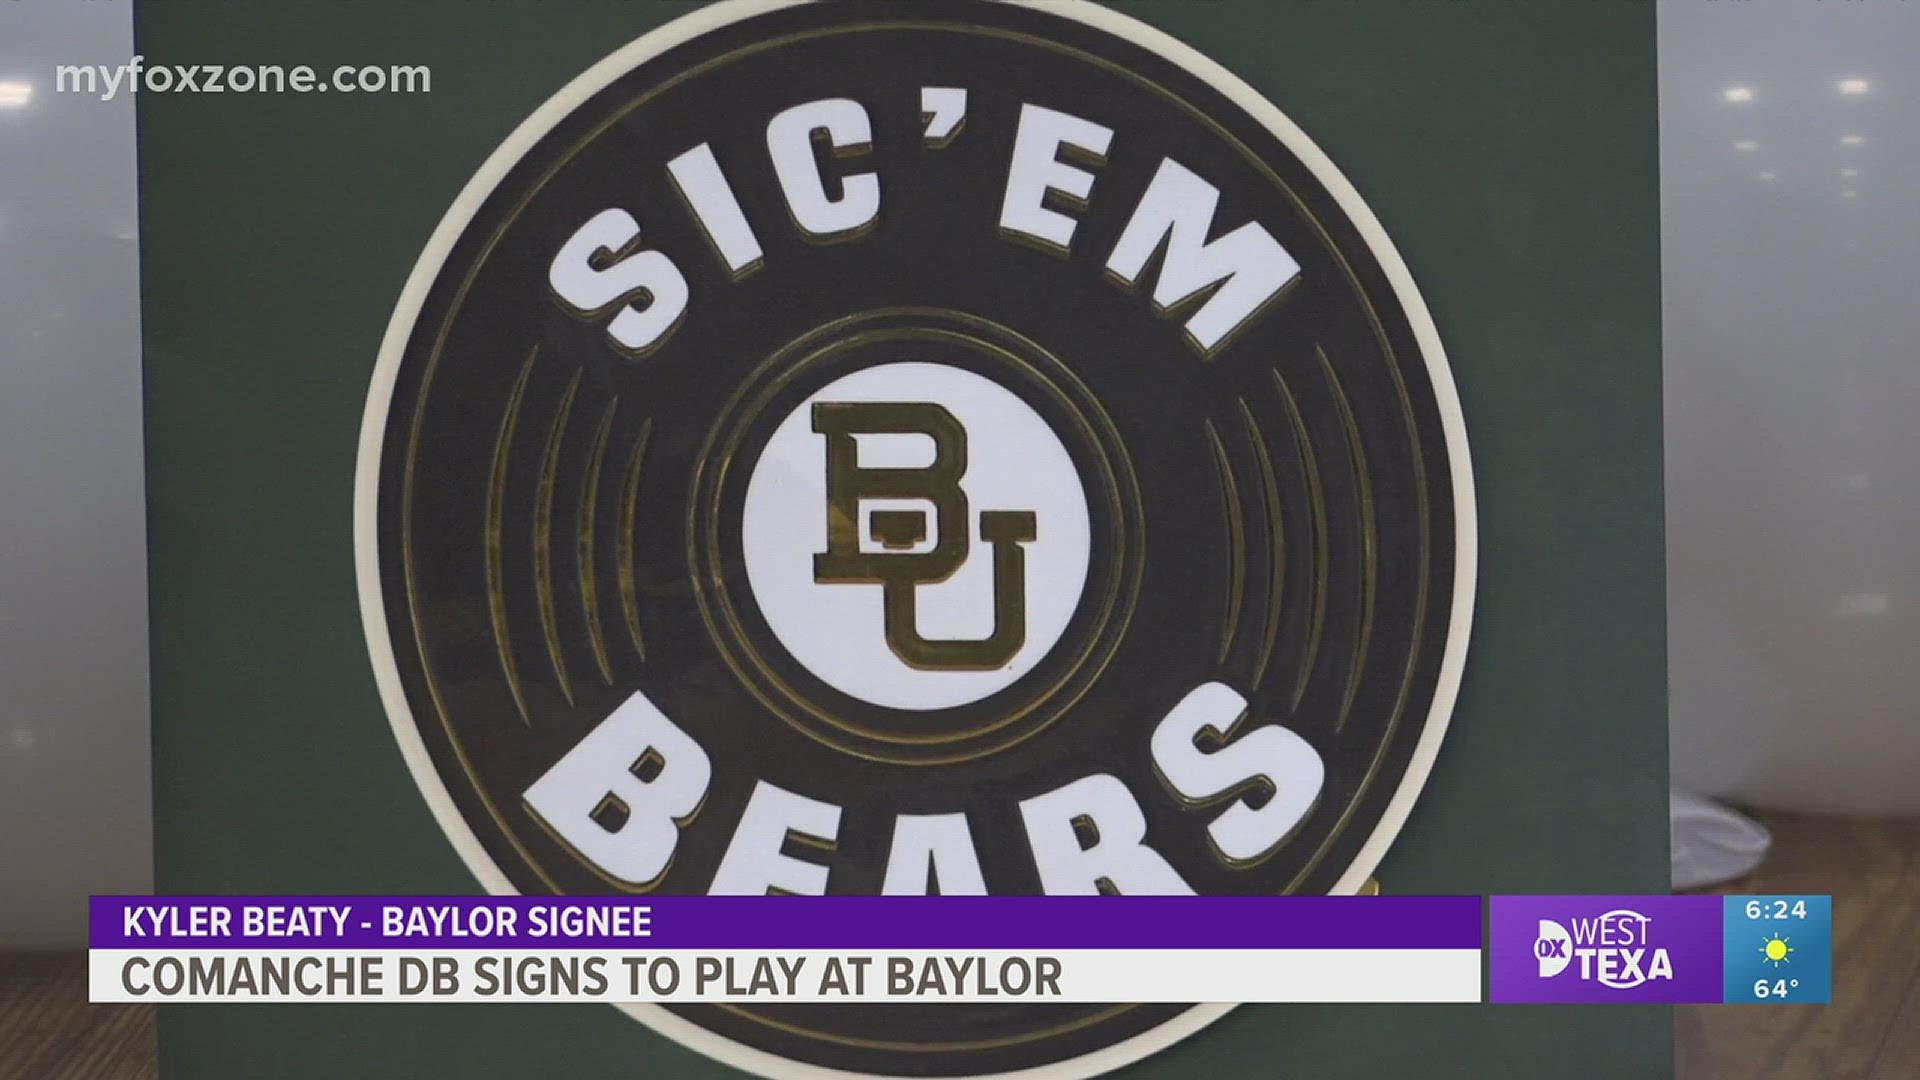 Comanche DB/WR Kyler Beaty signed to play for the Bears on Wednesday afternoon.